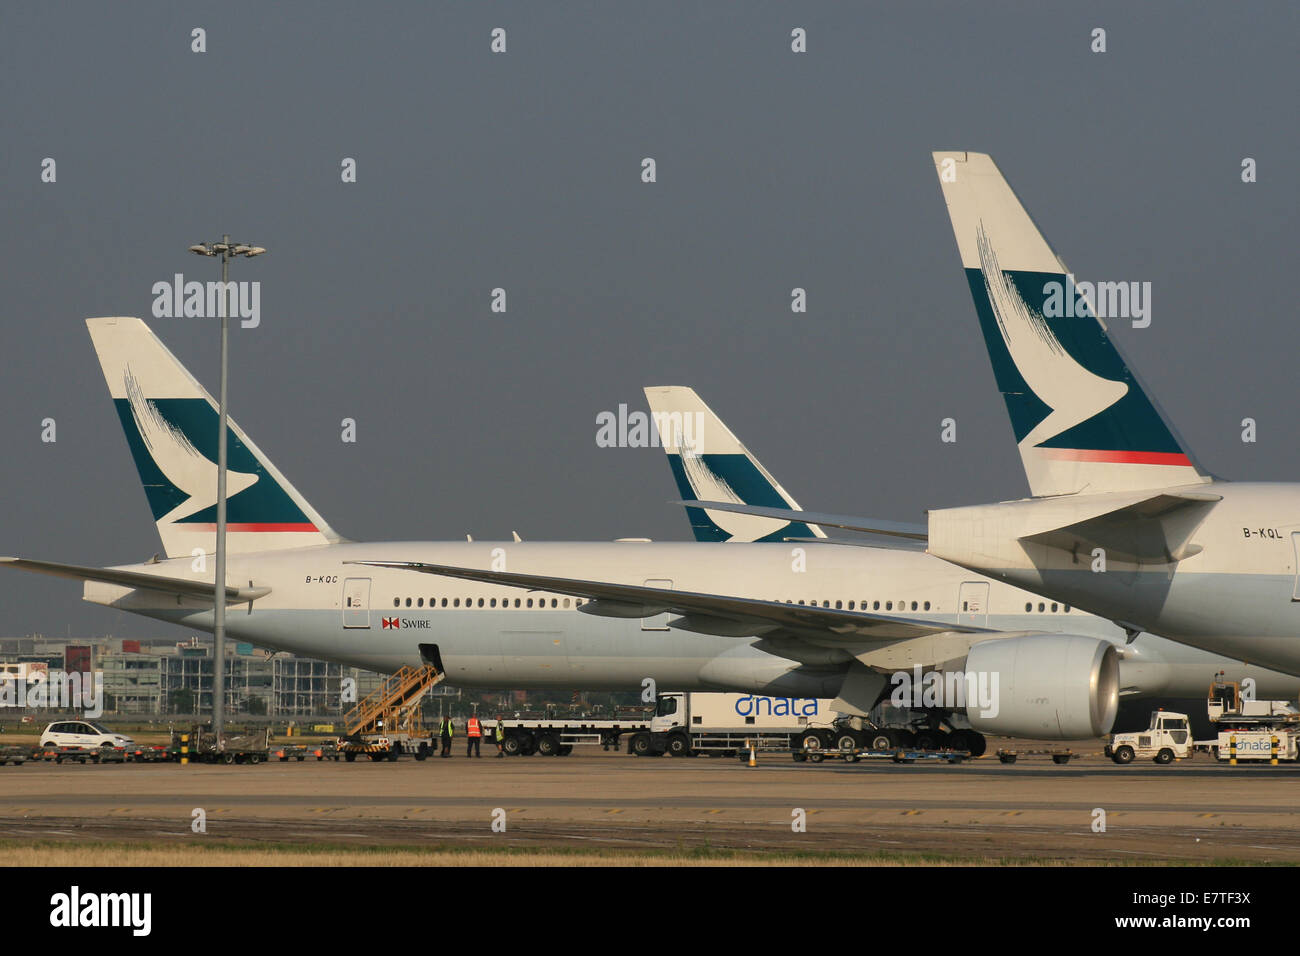 cathay pacific Stock Photo